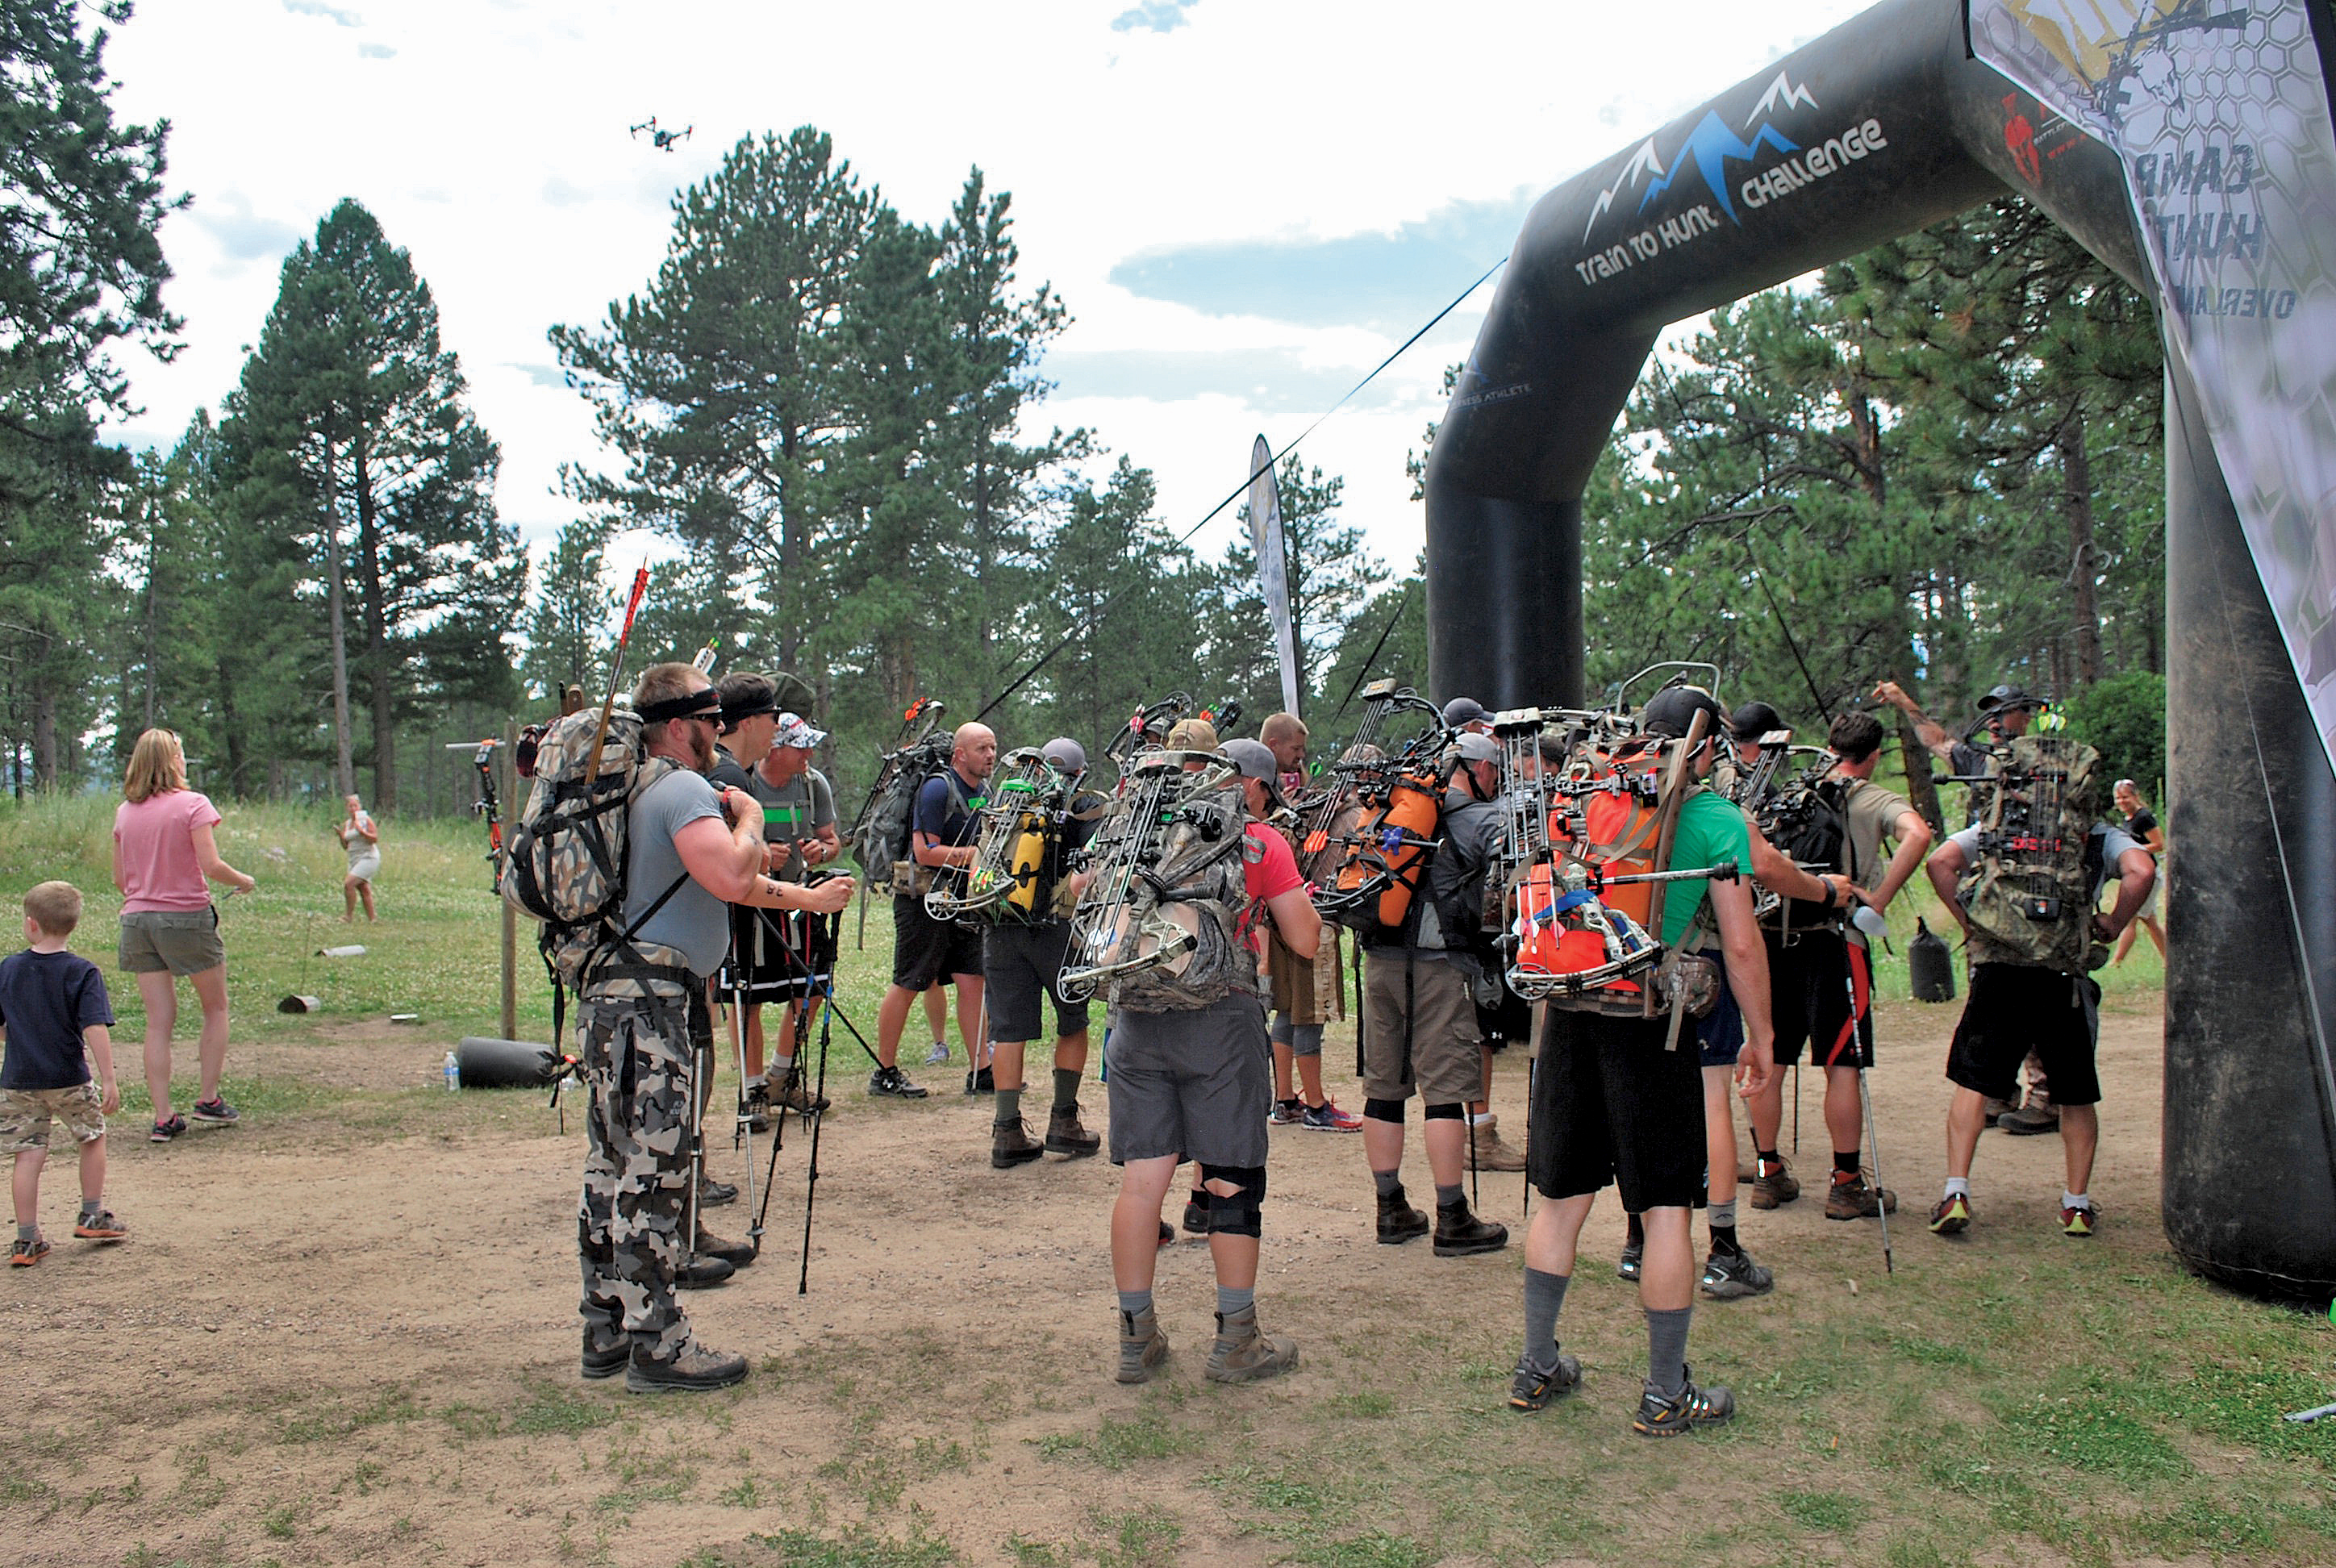 Athletes preparing for train to hunt challenge in the woods